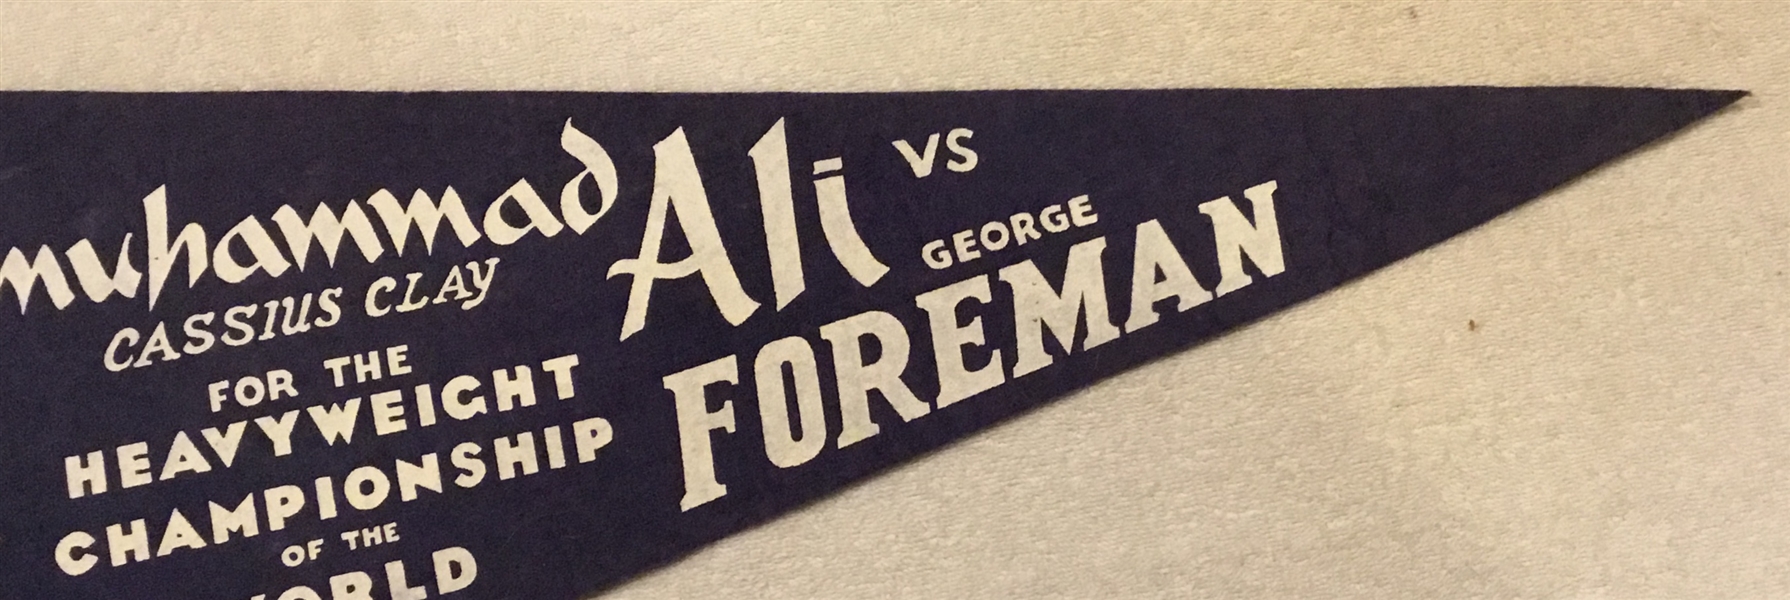 1974 RUMBLE IN THE JUNGLE PENNANT - ALI vs FOREMAN